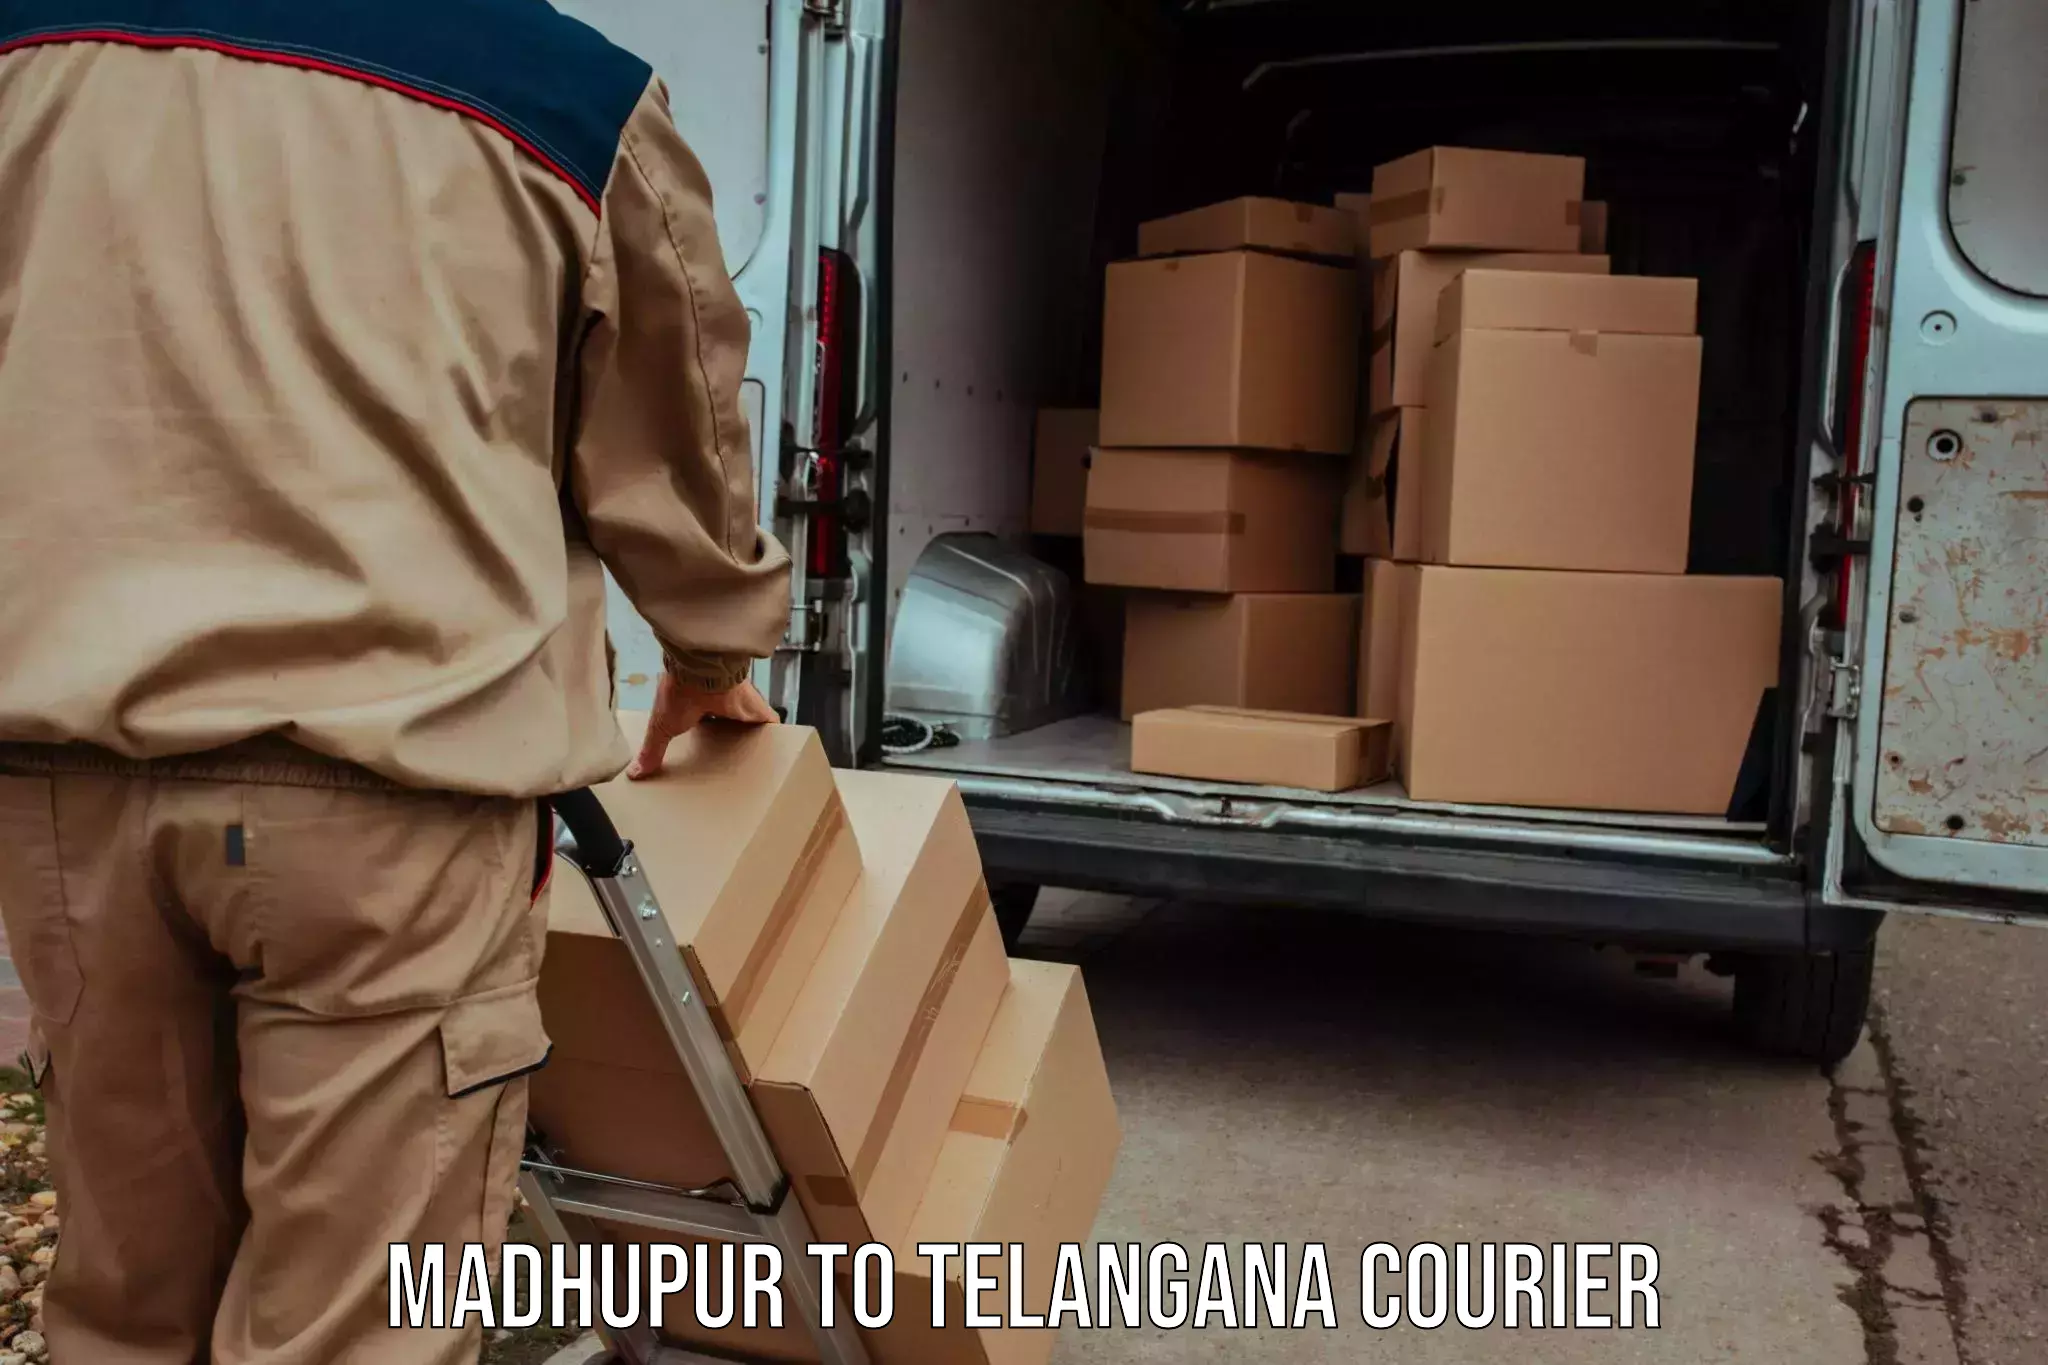 Next-day delivery options Madhupur to Rayaparthi